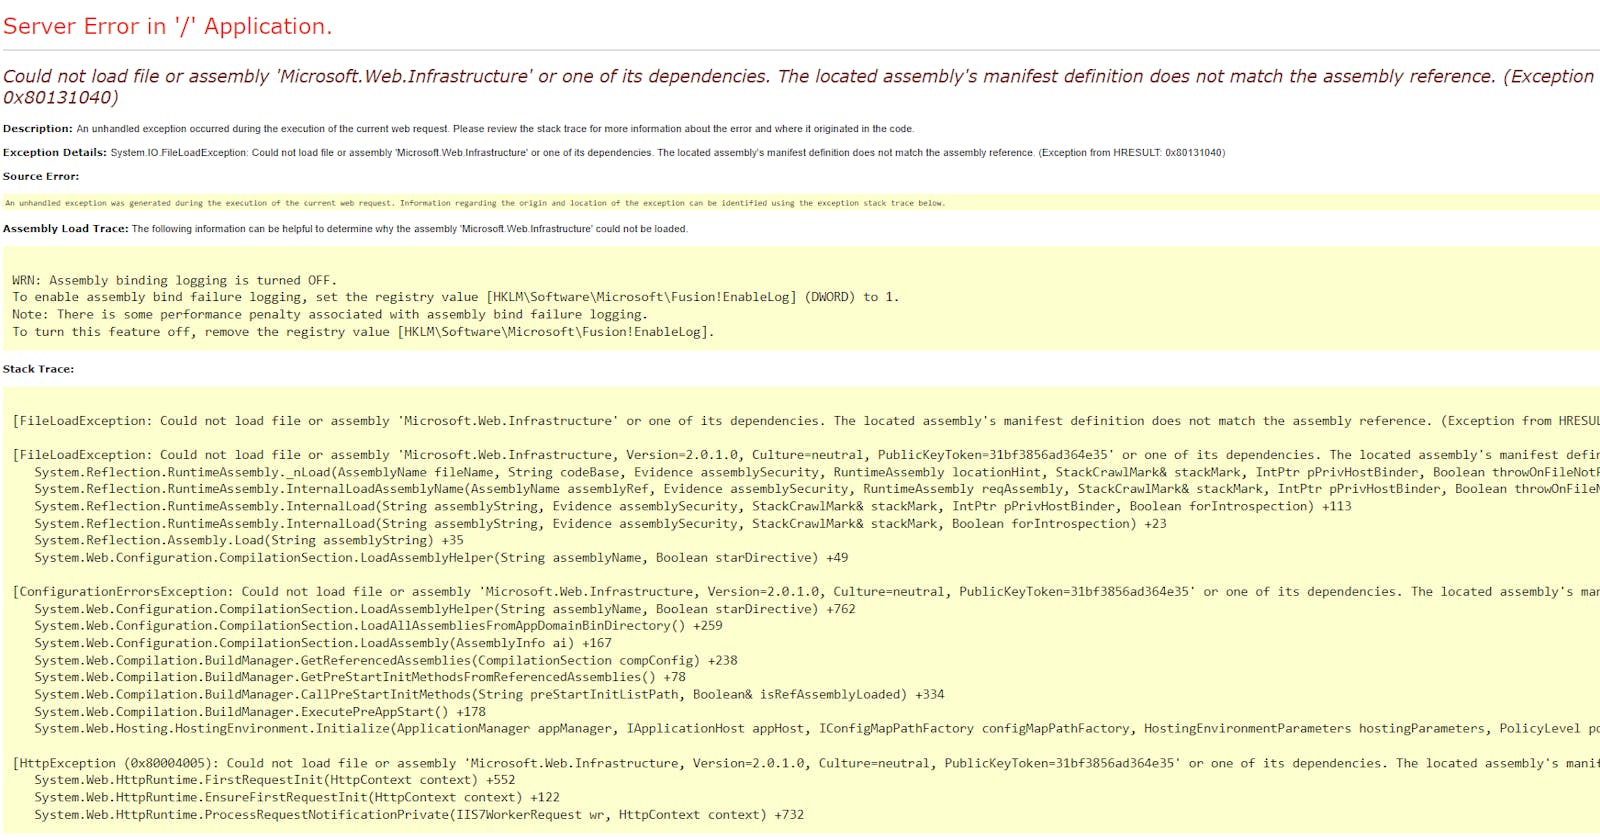 Could not load file or assembly 'Microsoft.Web.Infrastructure' or one of its dependencies.